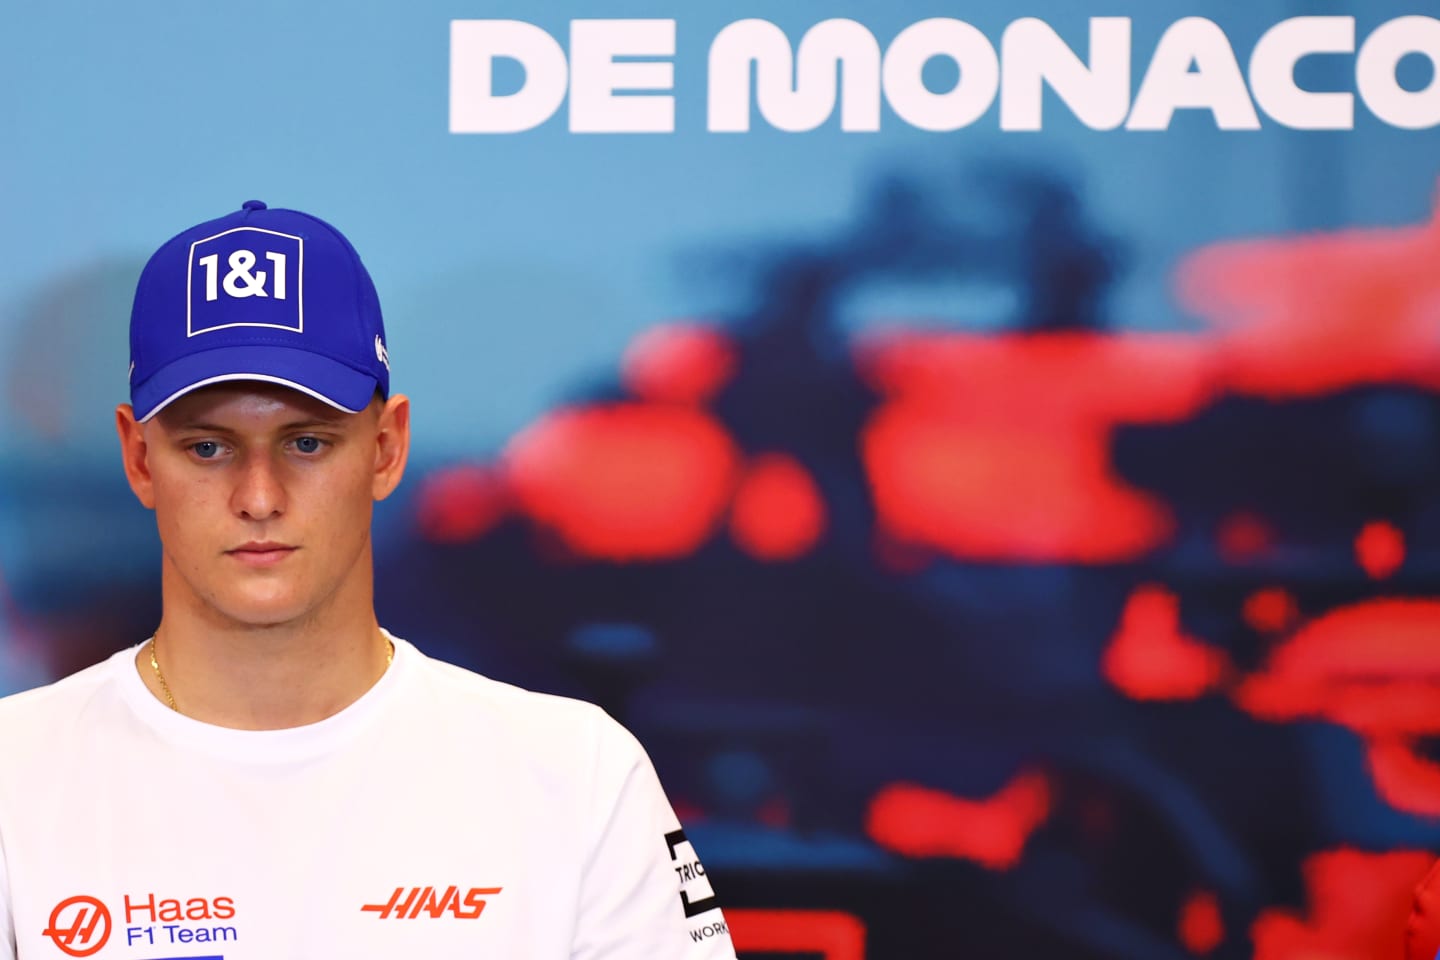 MONTE-CARLO, MONACO - MAY 27: Mick Schumacher of Germany and Haas F1 looks on in the Drivers Press Conference prior to practice ahead of the F1 Grand Prix of Monaco at Circuit de Monaco on May 27, 2022 in Monte-Carlo, Monaco. (Photo by Dan Istitene/Getty Images)